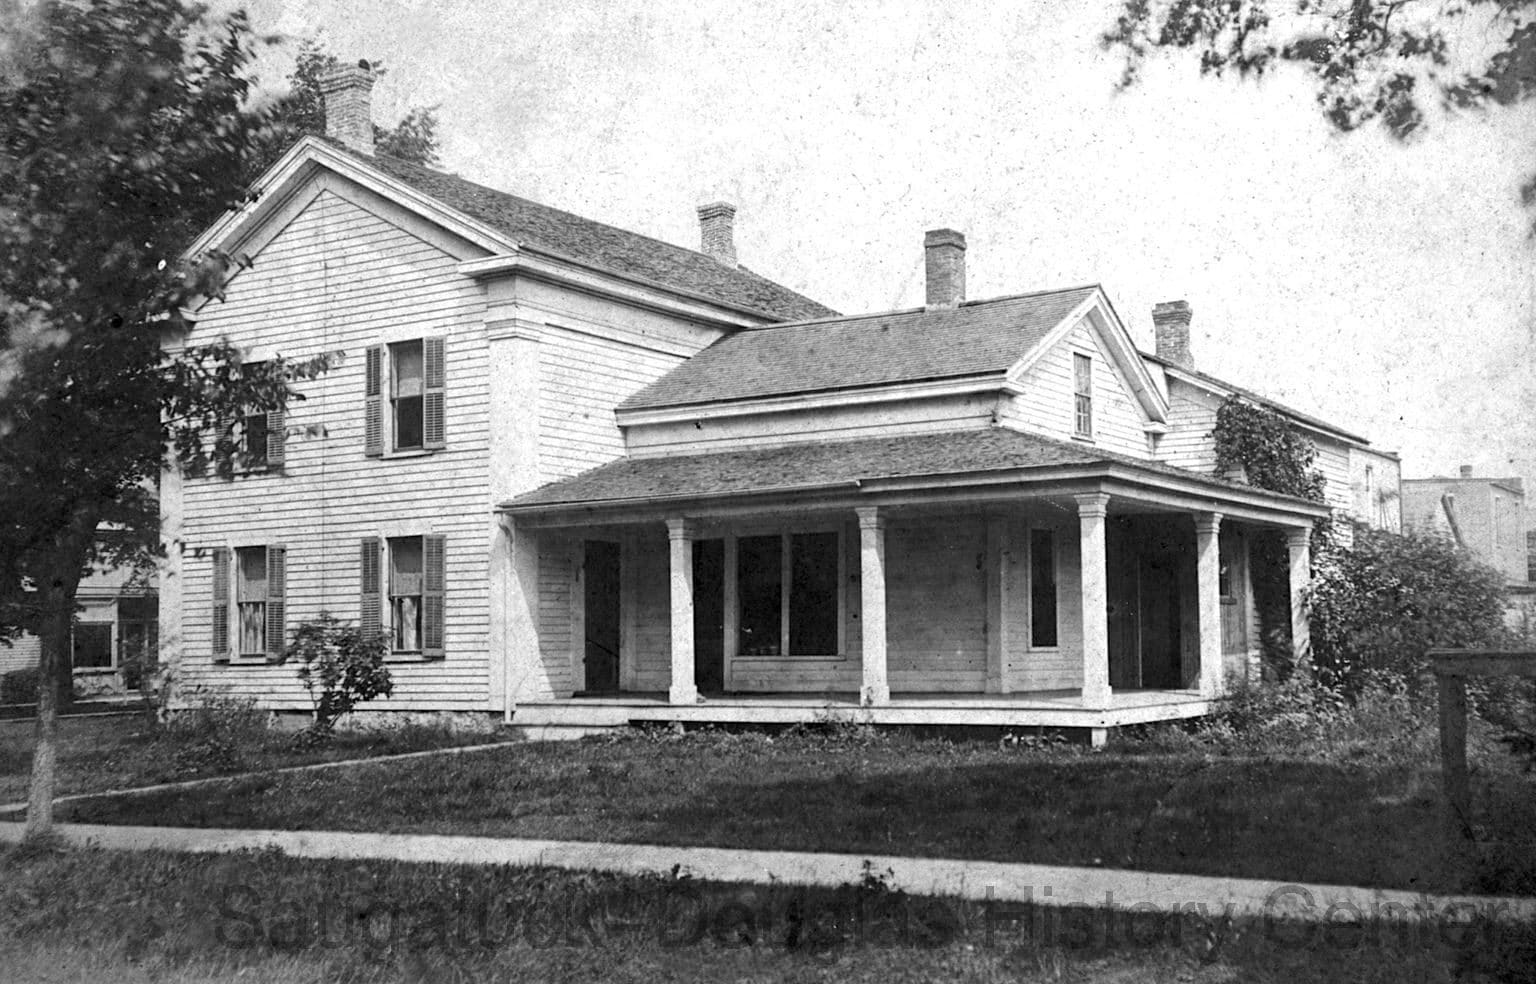 Morrison home - now known as Leland House